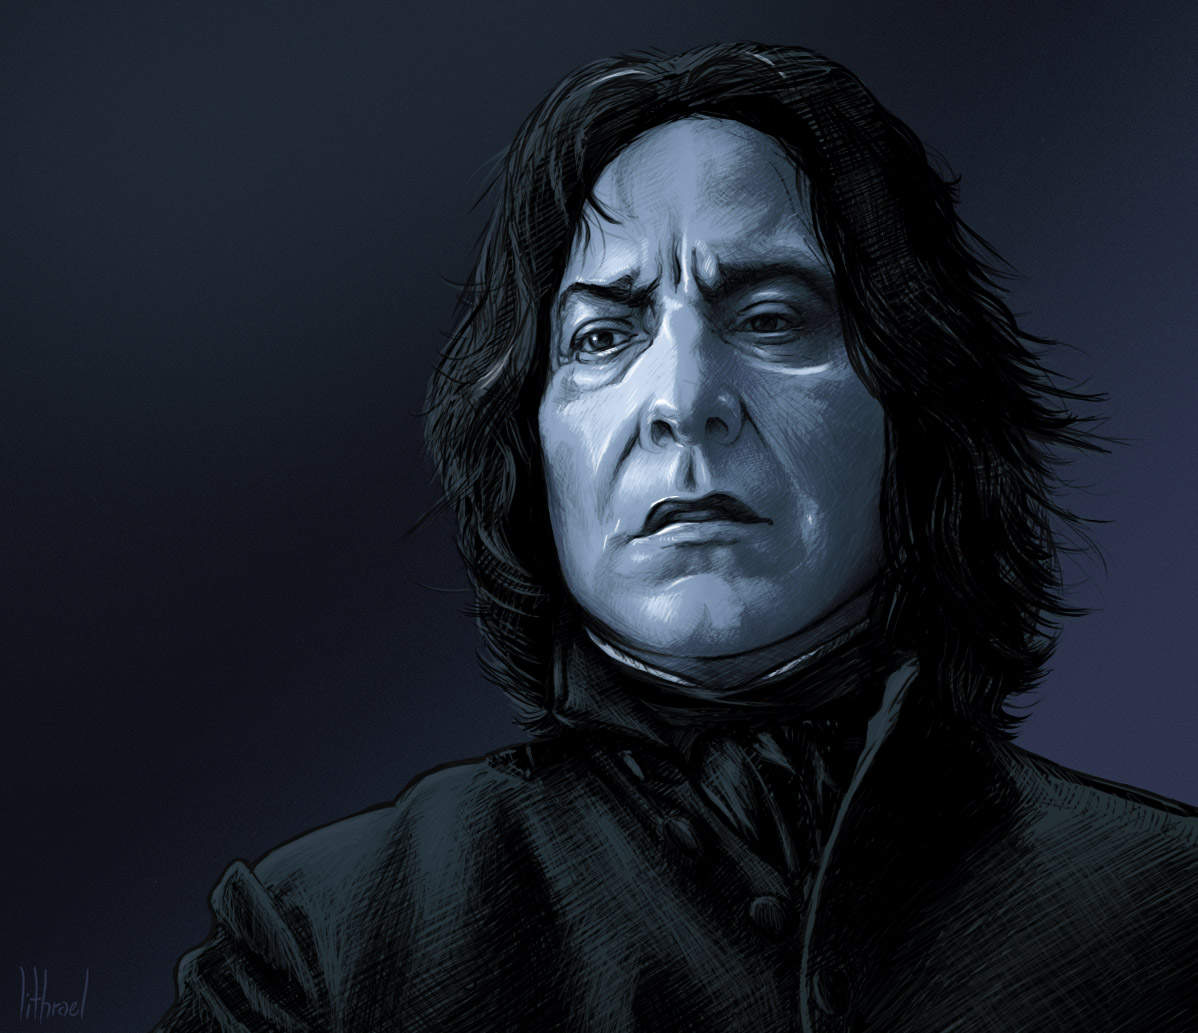 Alan_Rickman_Is_Snape_by_Lithrael